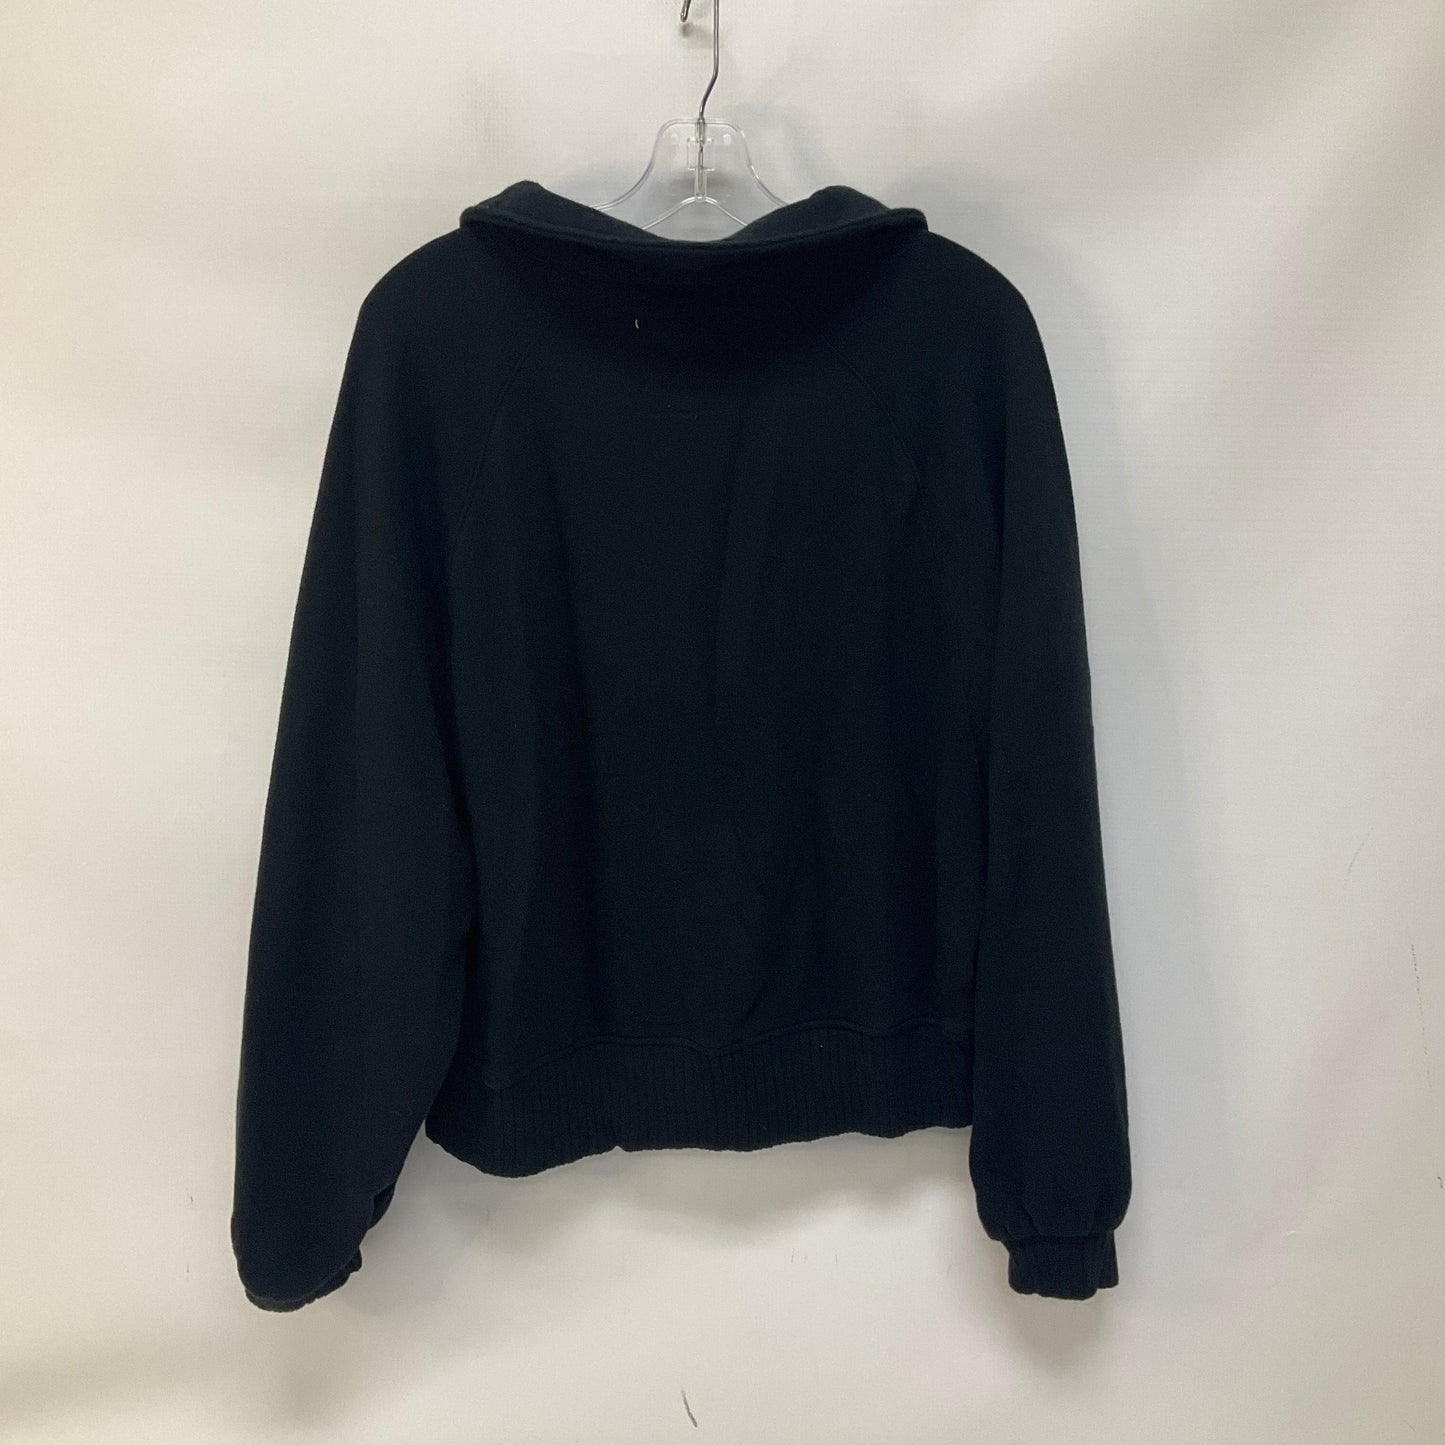 Black Top Long Sleeve Aerie, Size M